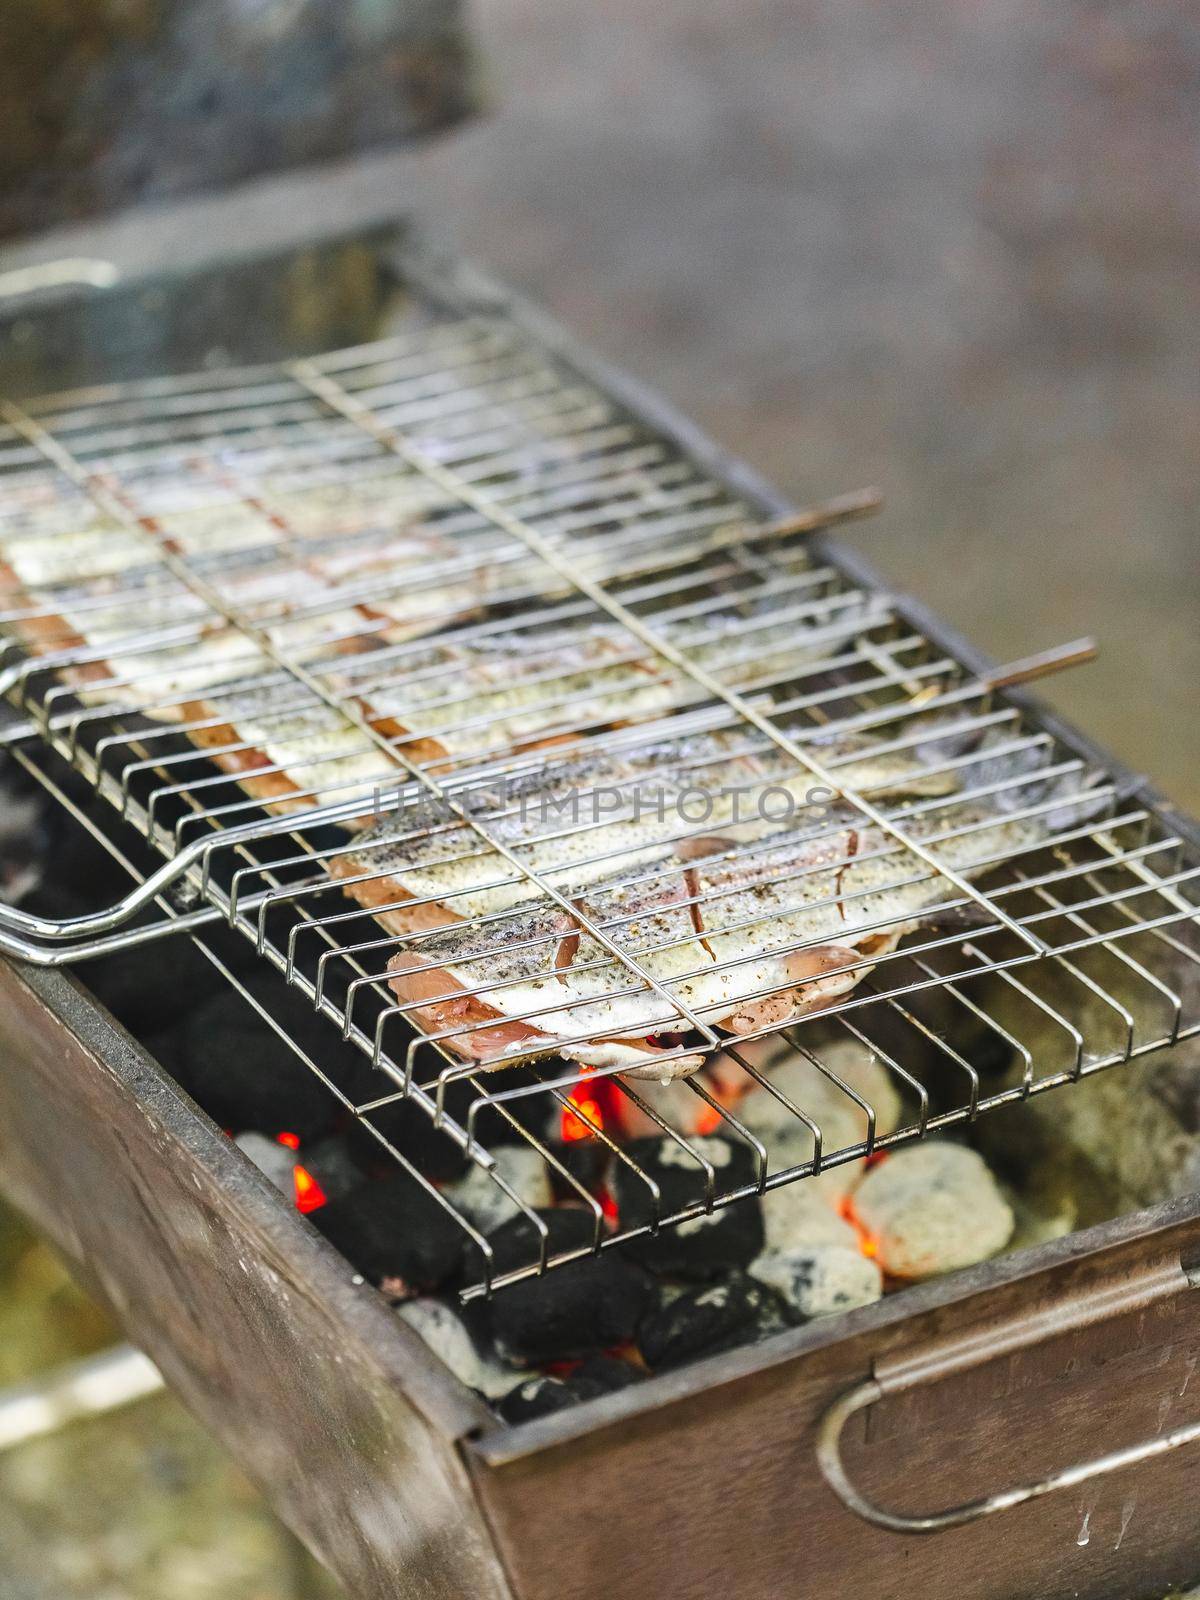 Preparing fresh trout fish on charcoal grill by Syvanych